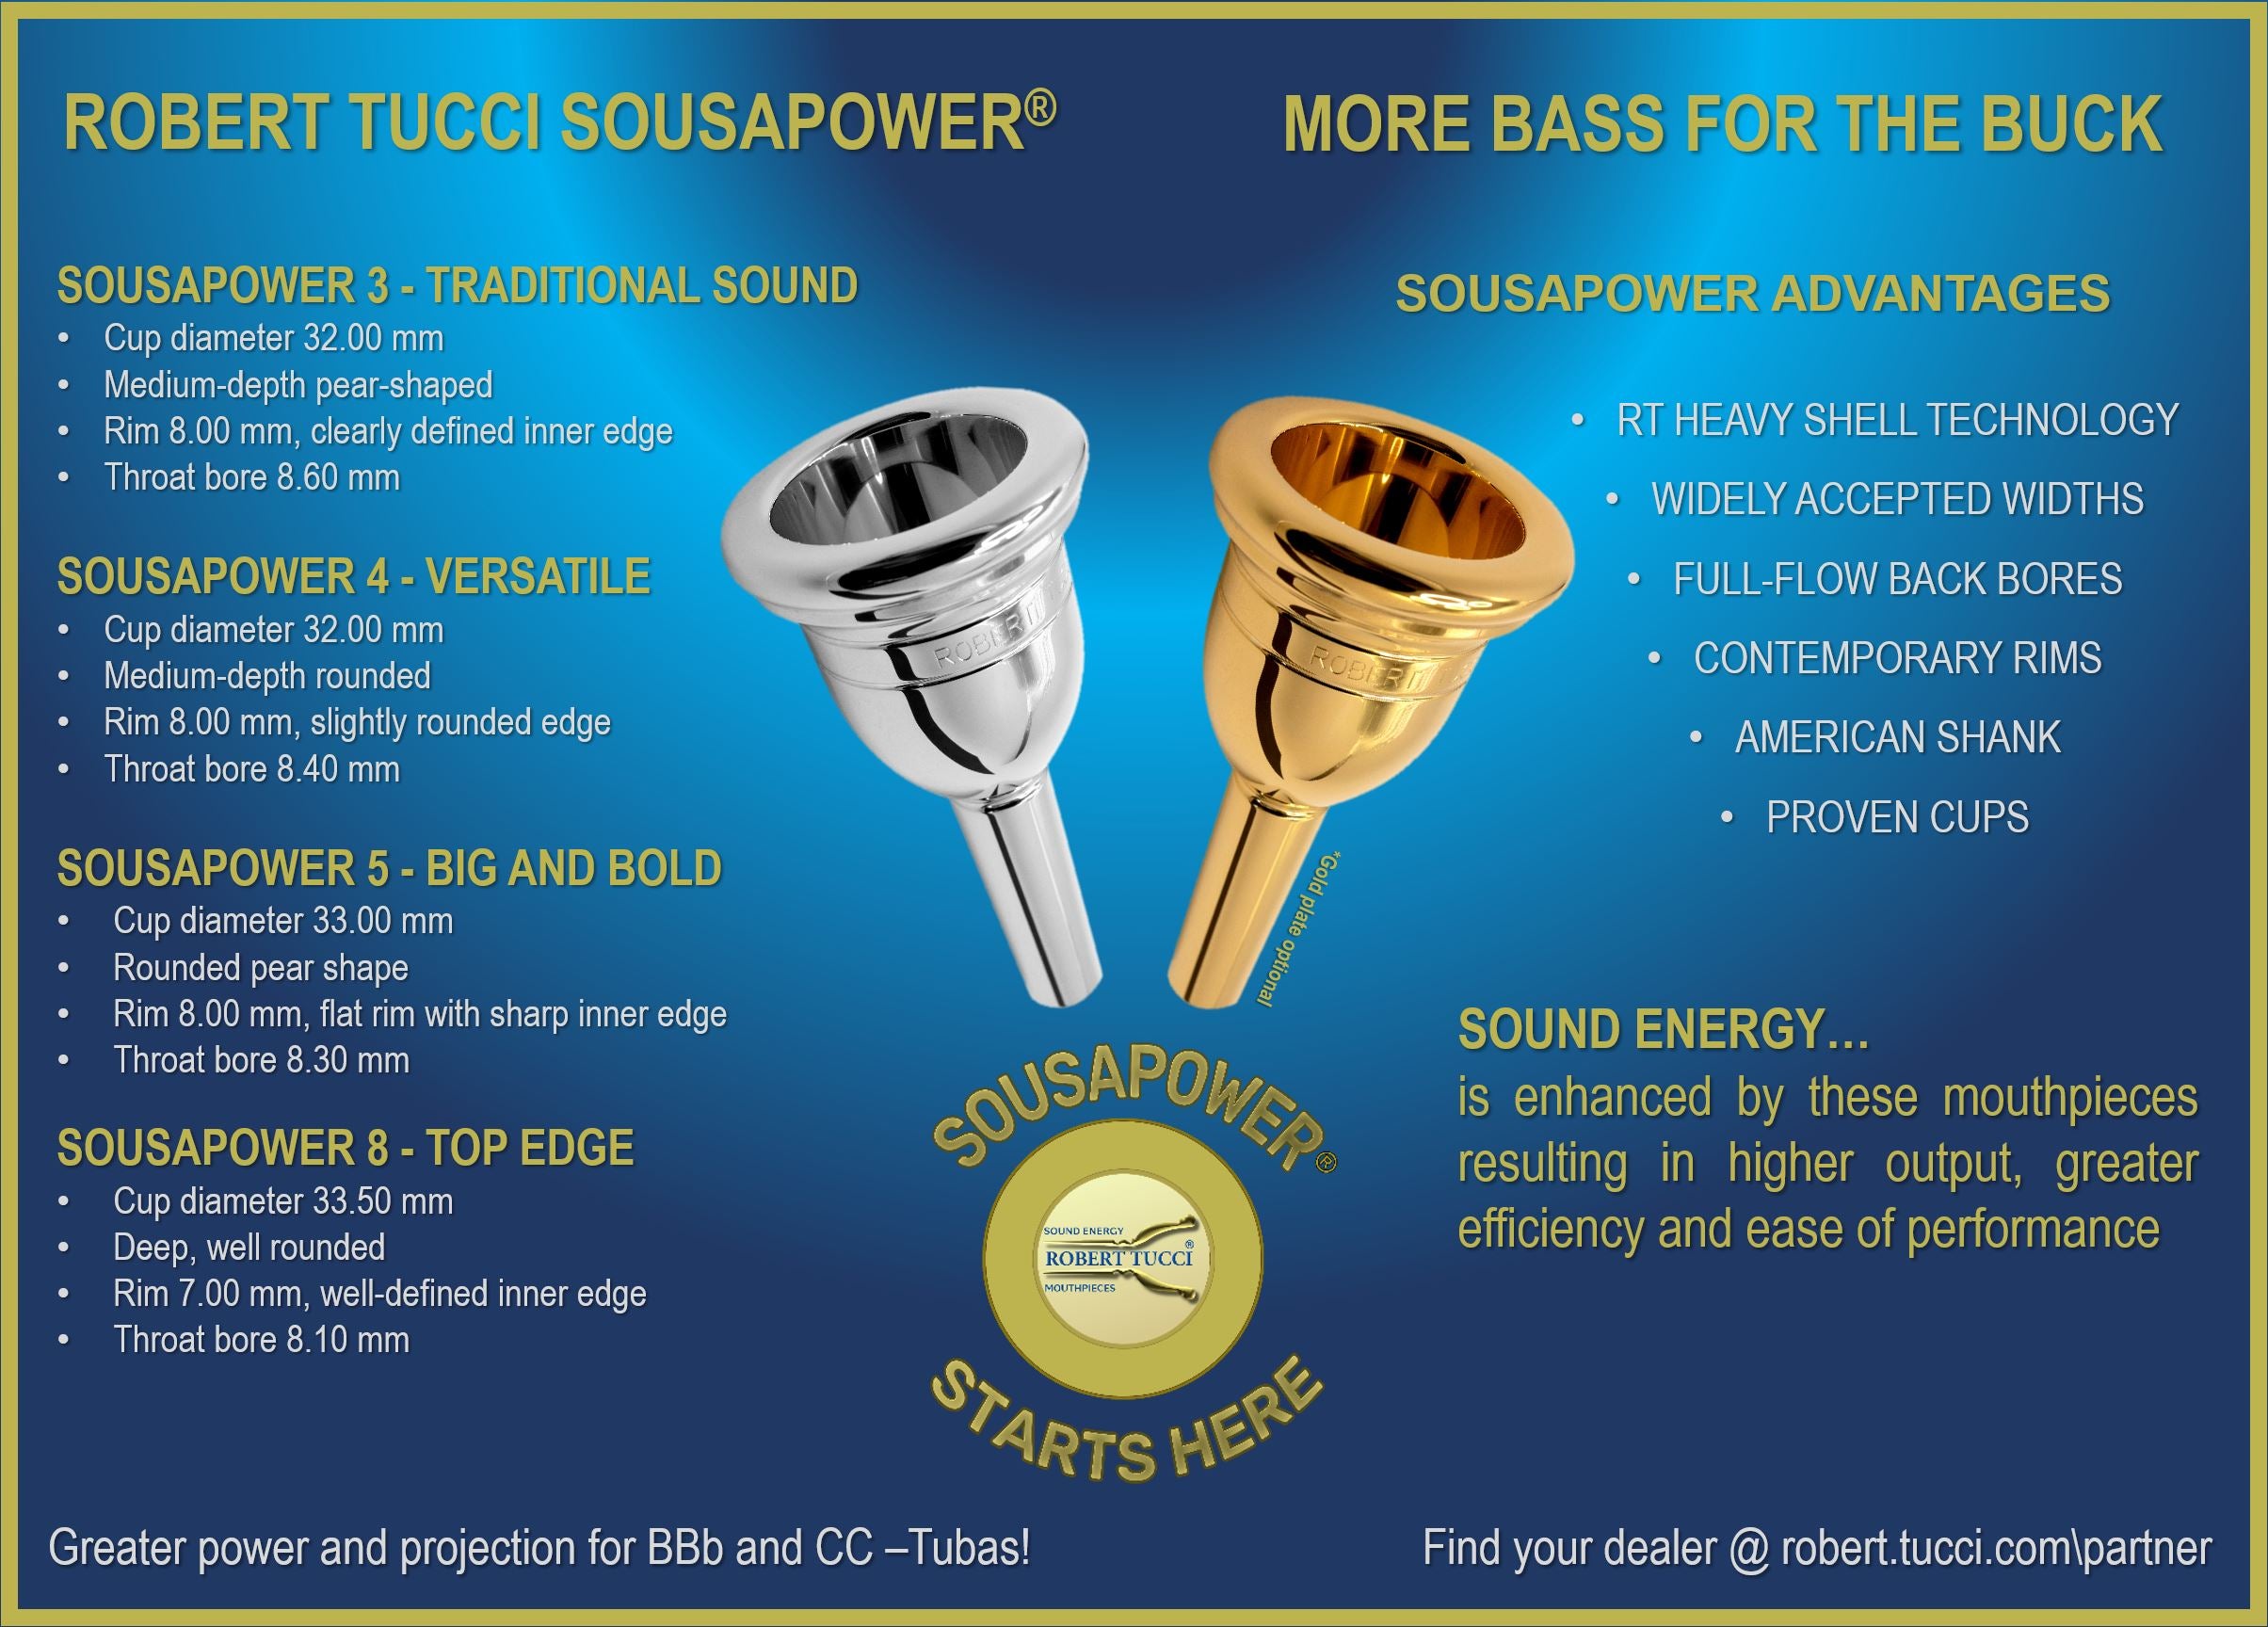 Robert Tucci SOUSAPOWER Mouthpieces